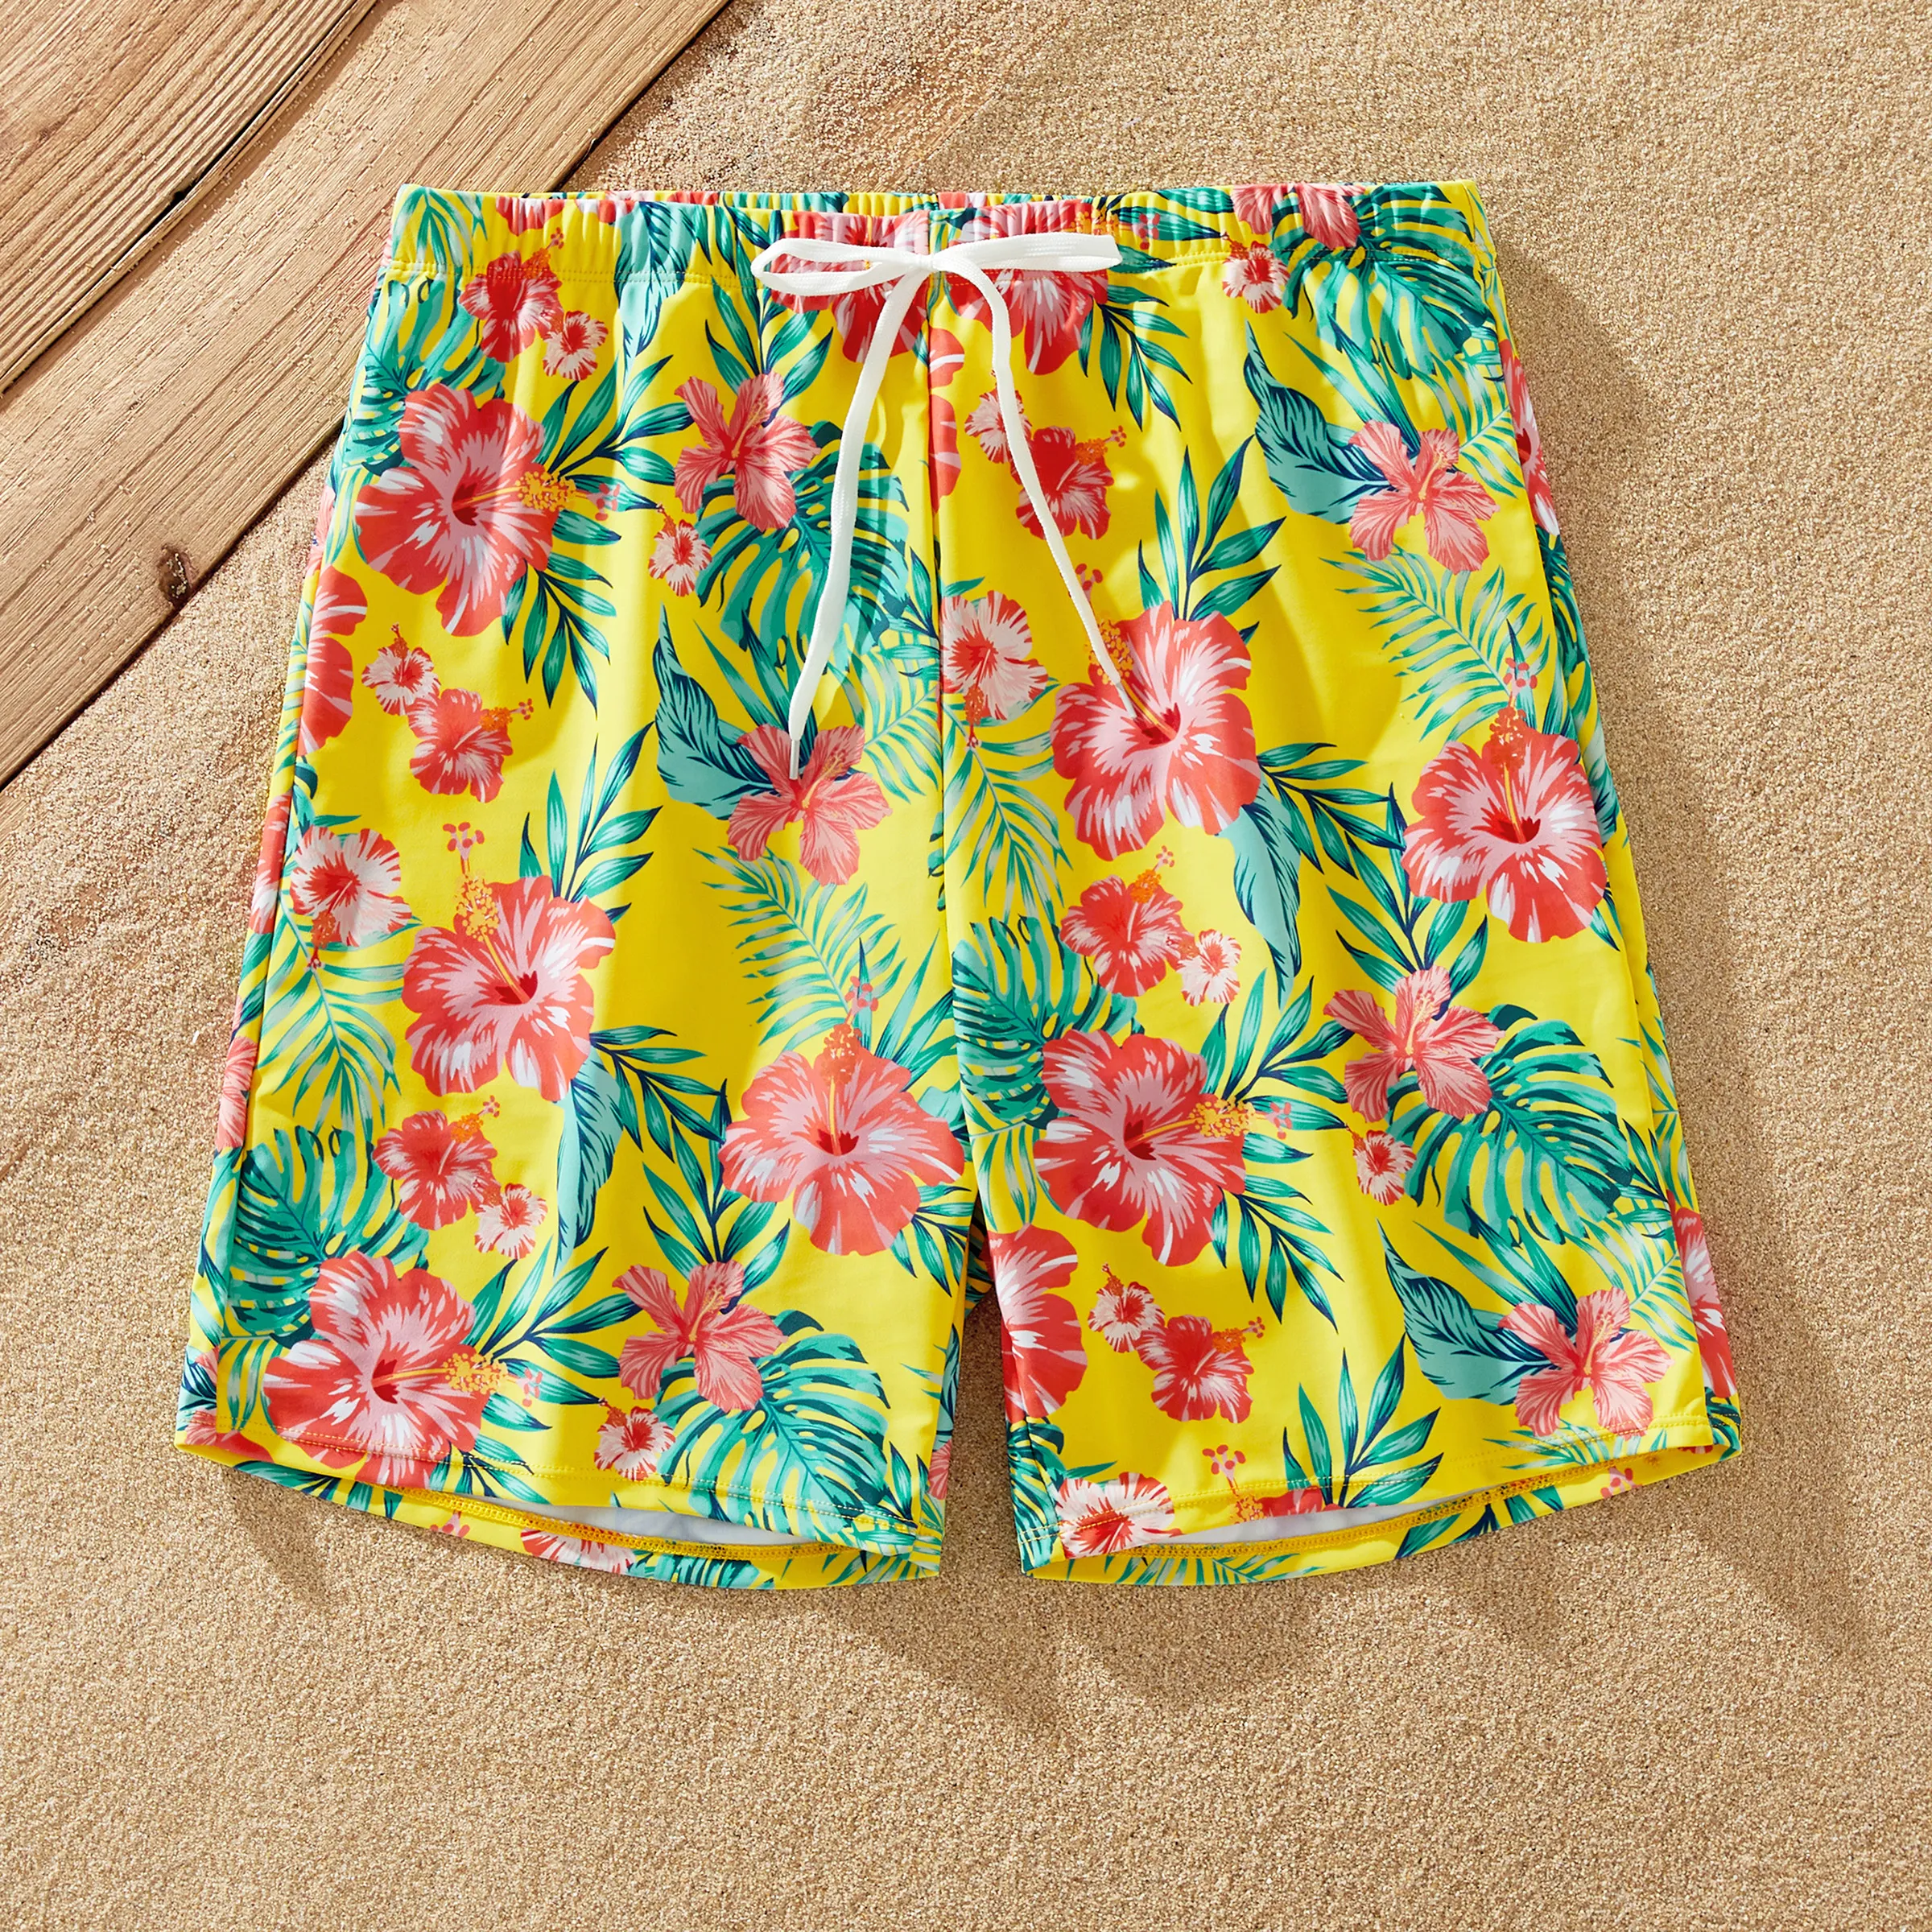 

Family Matching Yellow Tropical Drawstring Swim Trunks or Flowy Ruffle Two-Piece Swimsuit